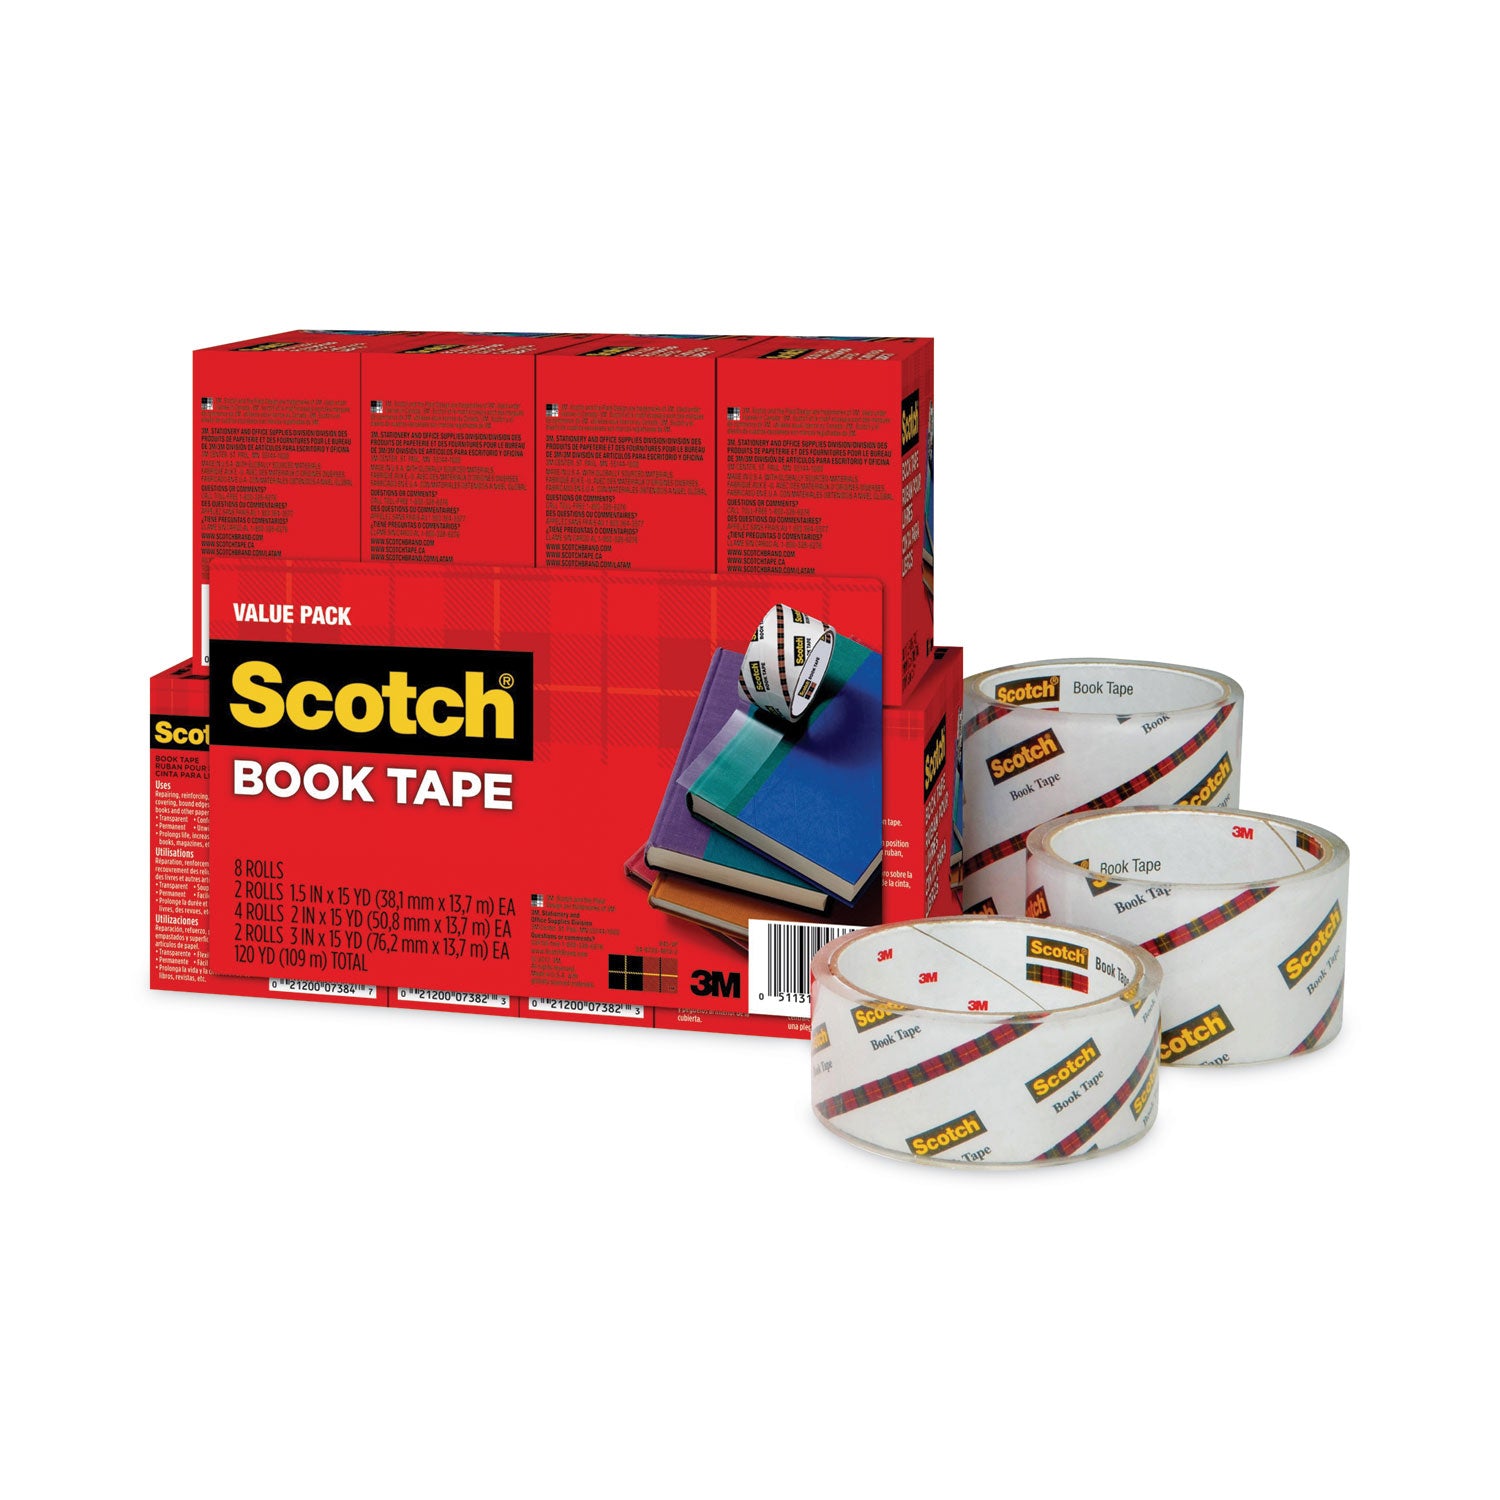 Book Tape Value Pack, 3" Core, (2) 1.5" x 15 yds, (4) 2" x 15 yds, (2) 3" x 15 yds, Clear, 8/Pack - 